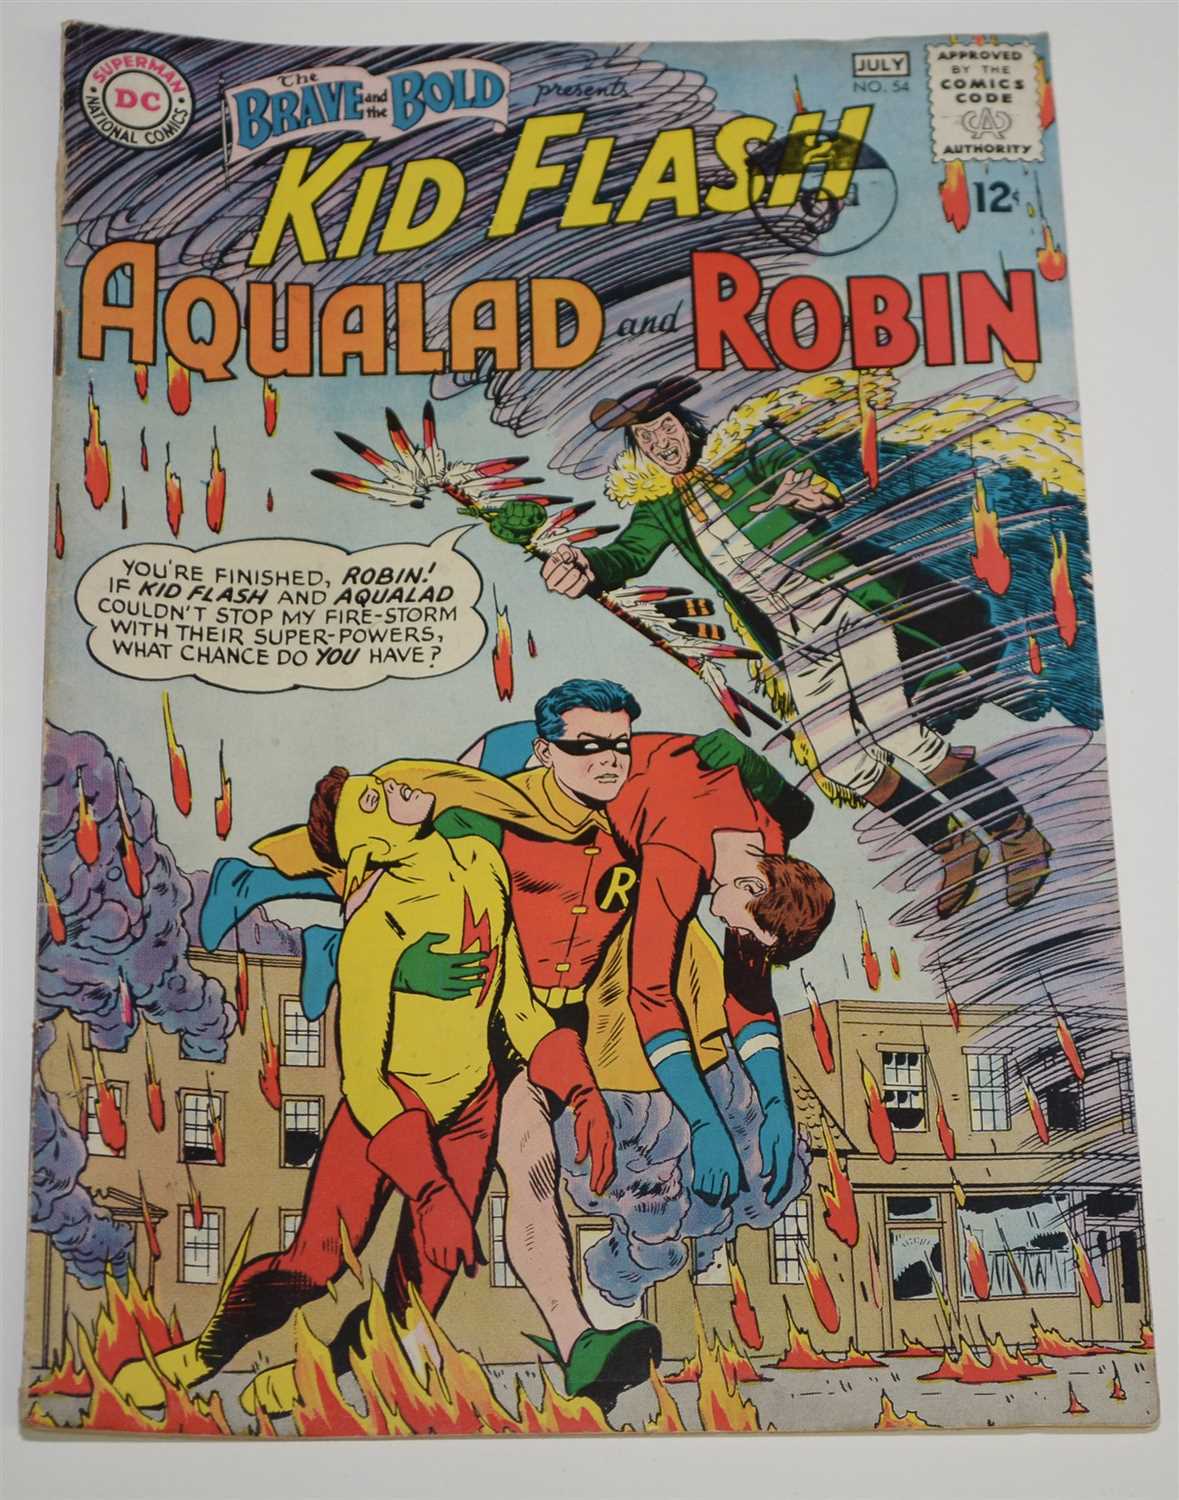 Lot 1440 - The Brave and The Bold Presents Kid Flash, Aqualad and Robin Comic